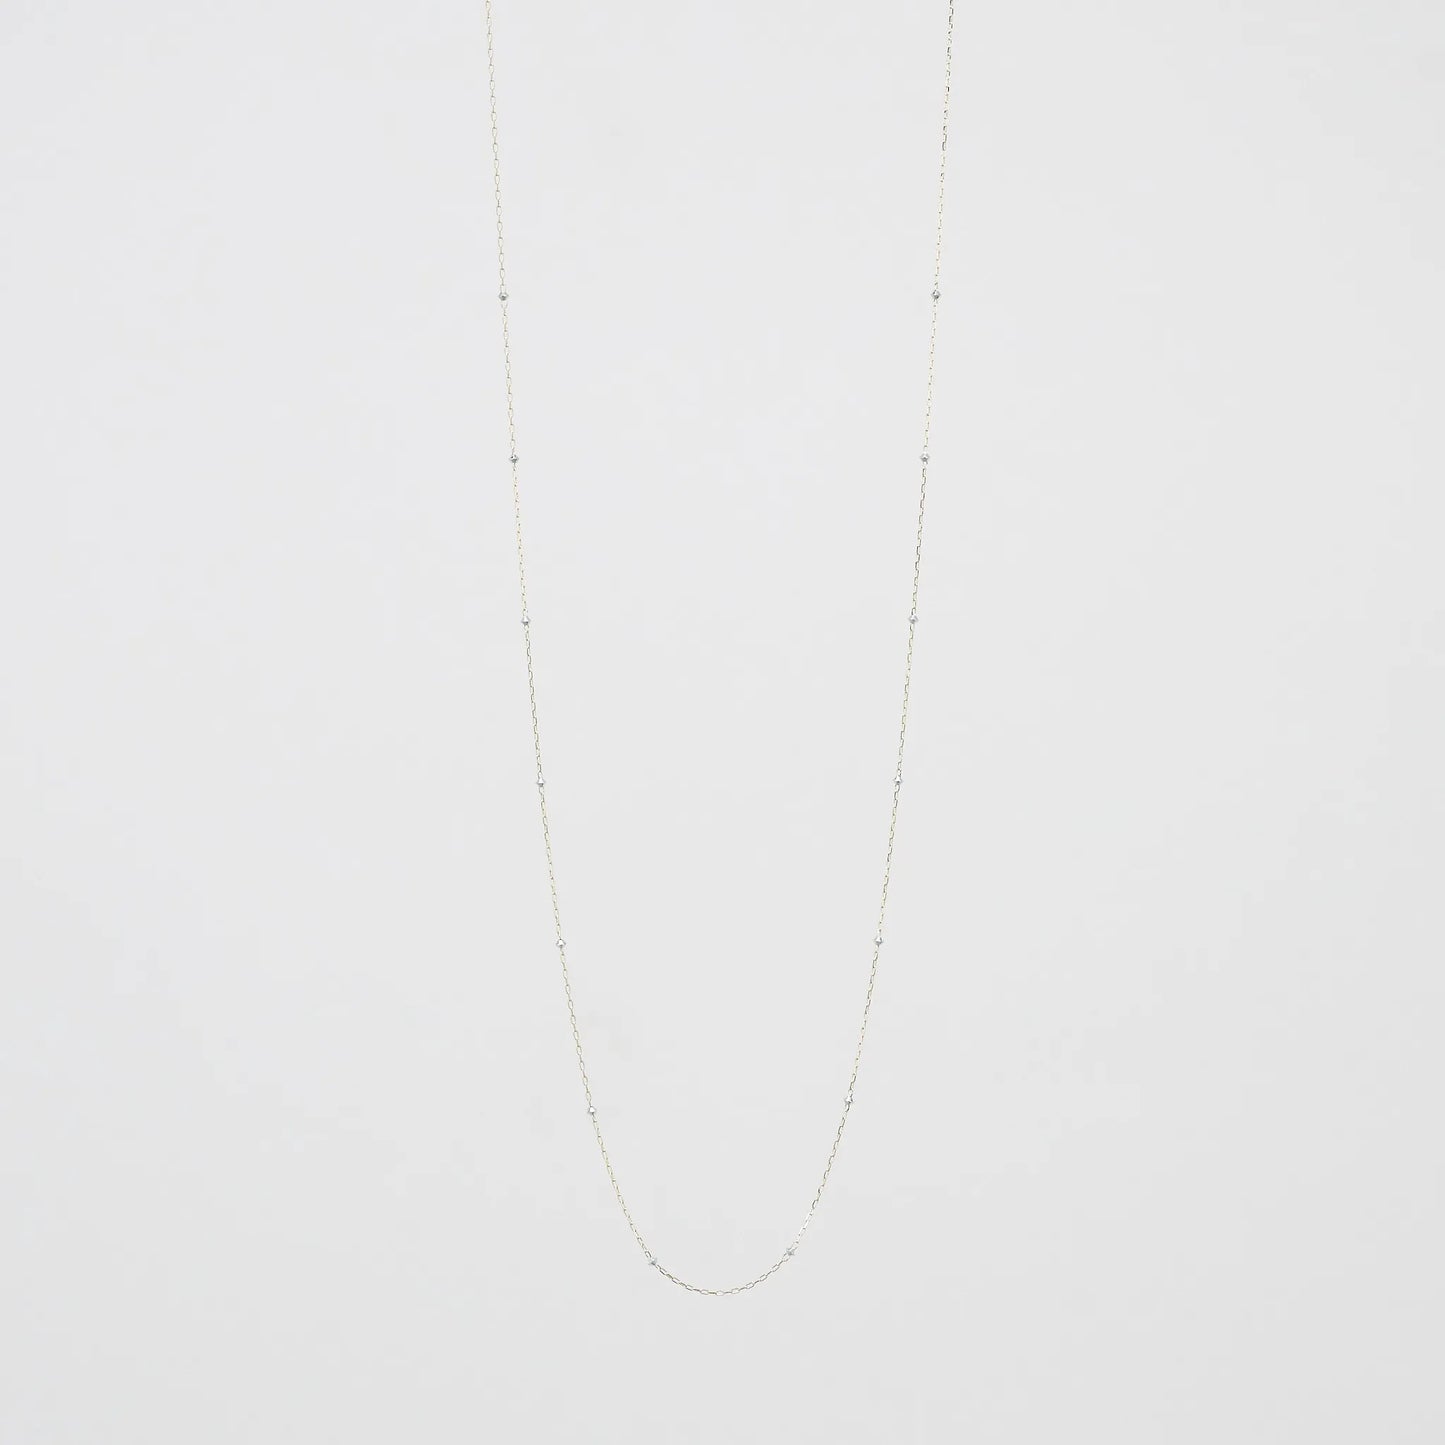 Gold Chain Necklace_silver colored parts(80cm)